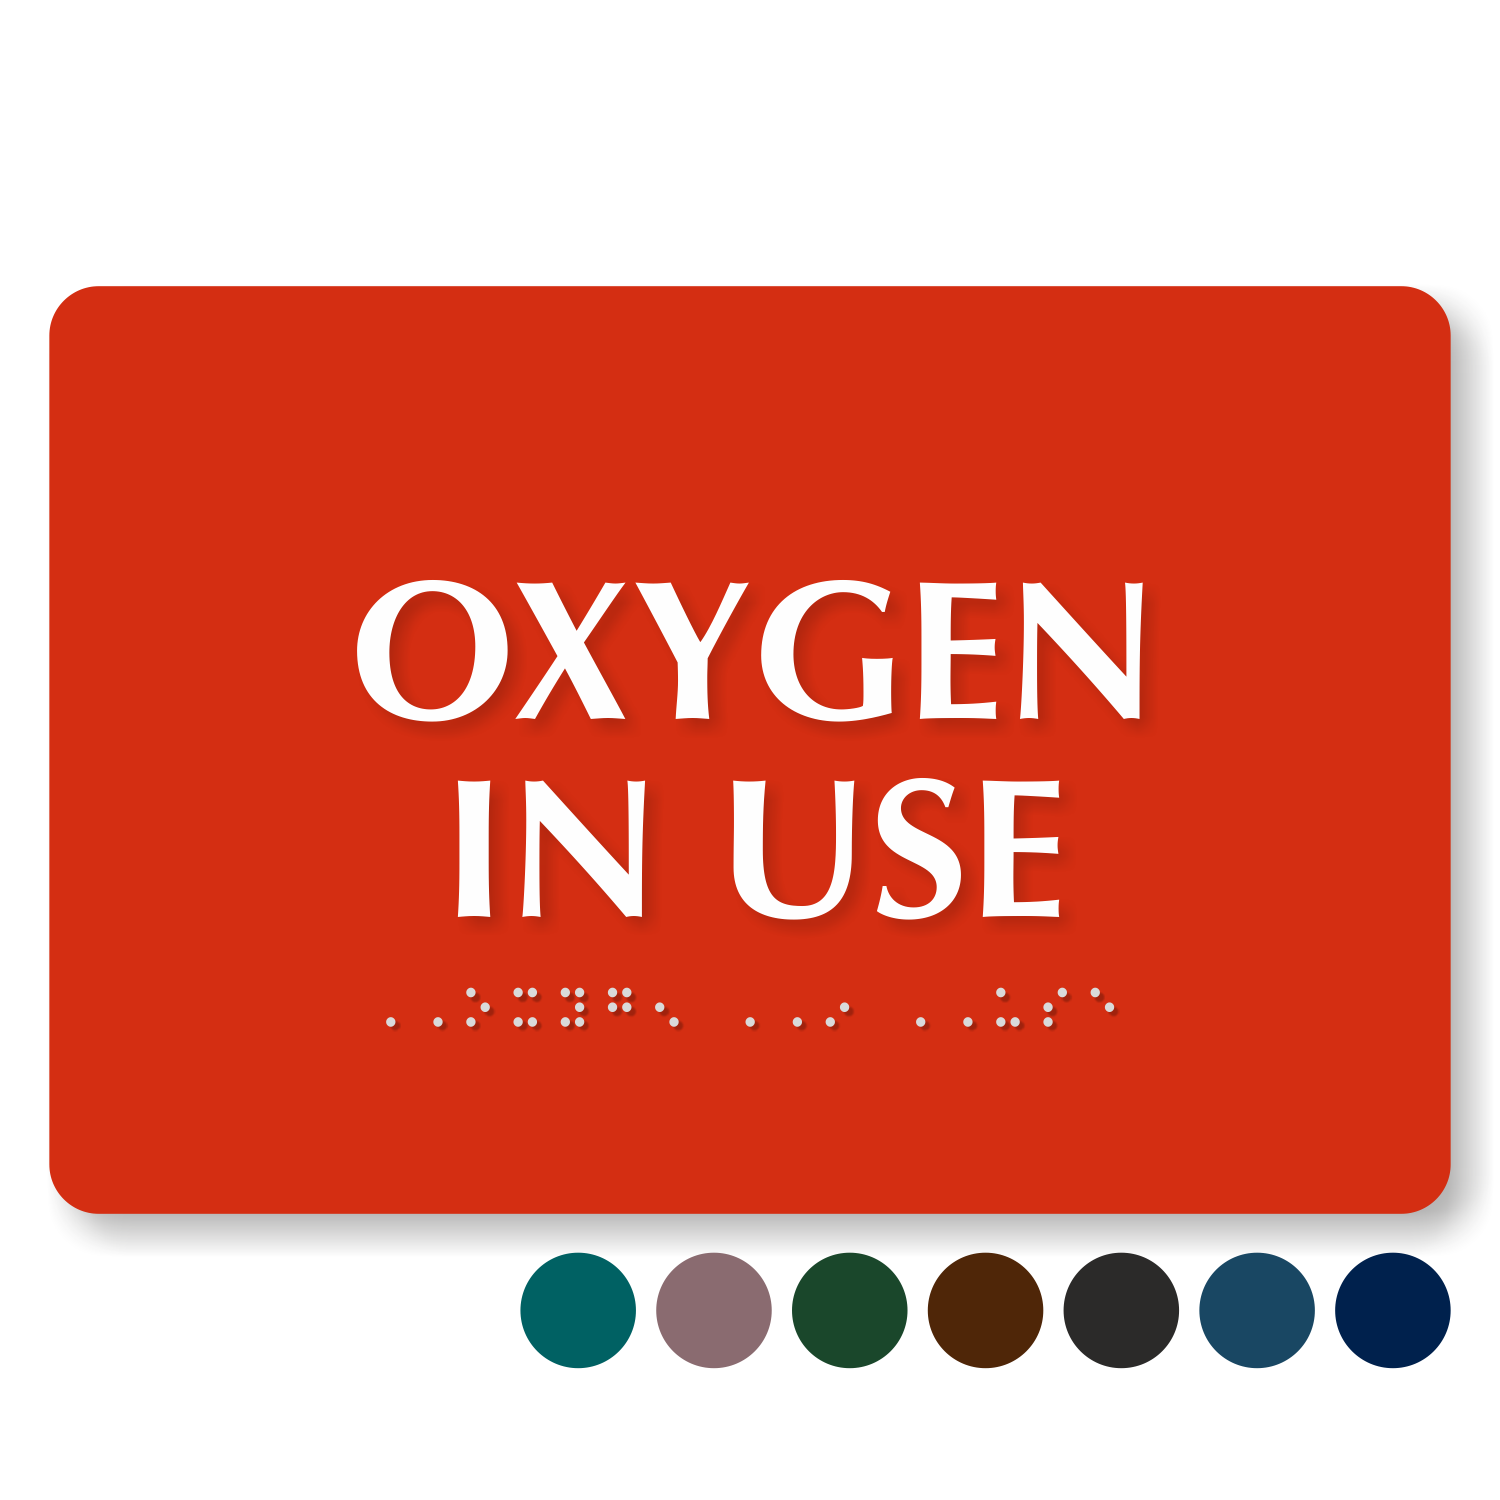 oxygen-signs-oxygen-in-use-signs-no-smoking-oxygen